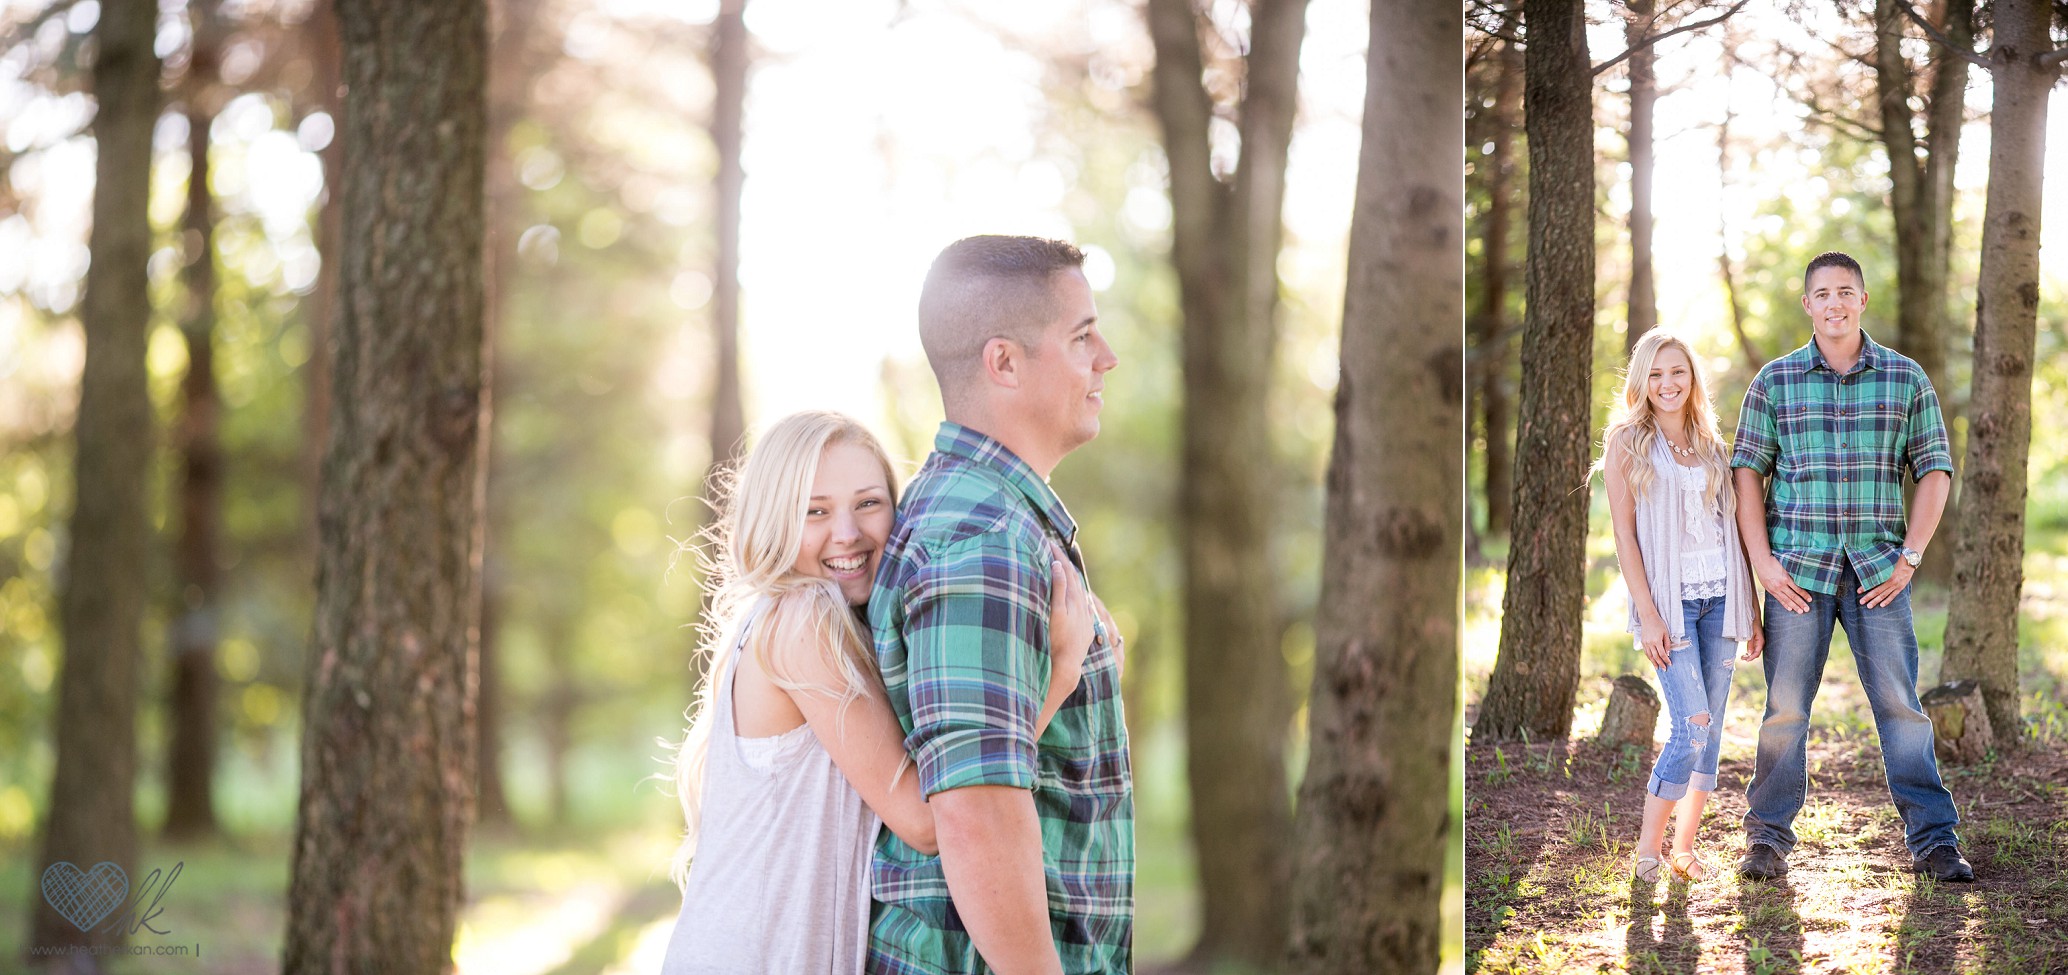 Country engagement session lansing mi